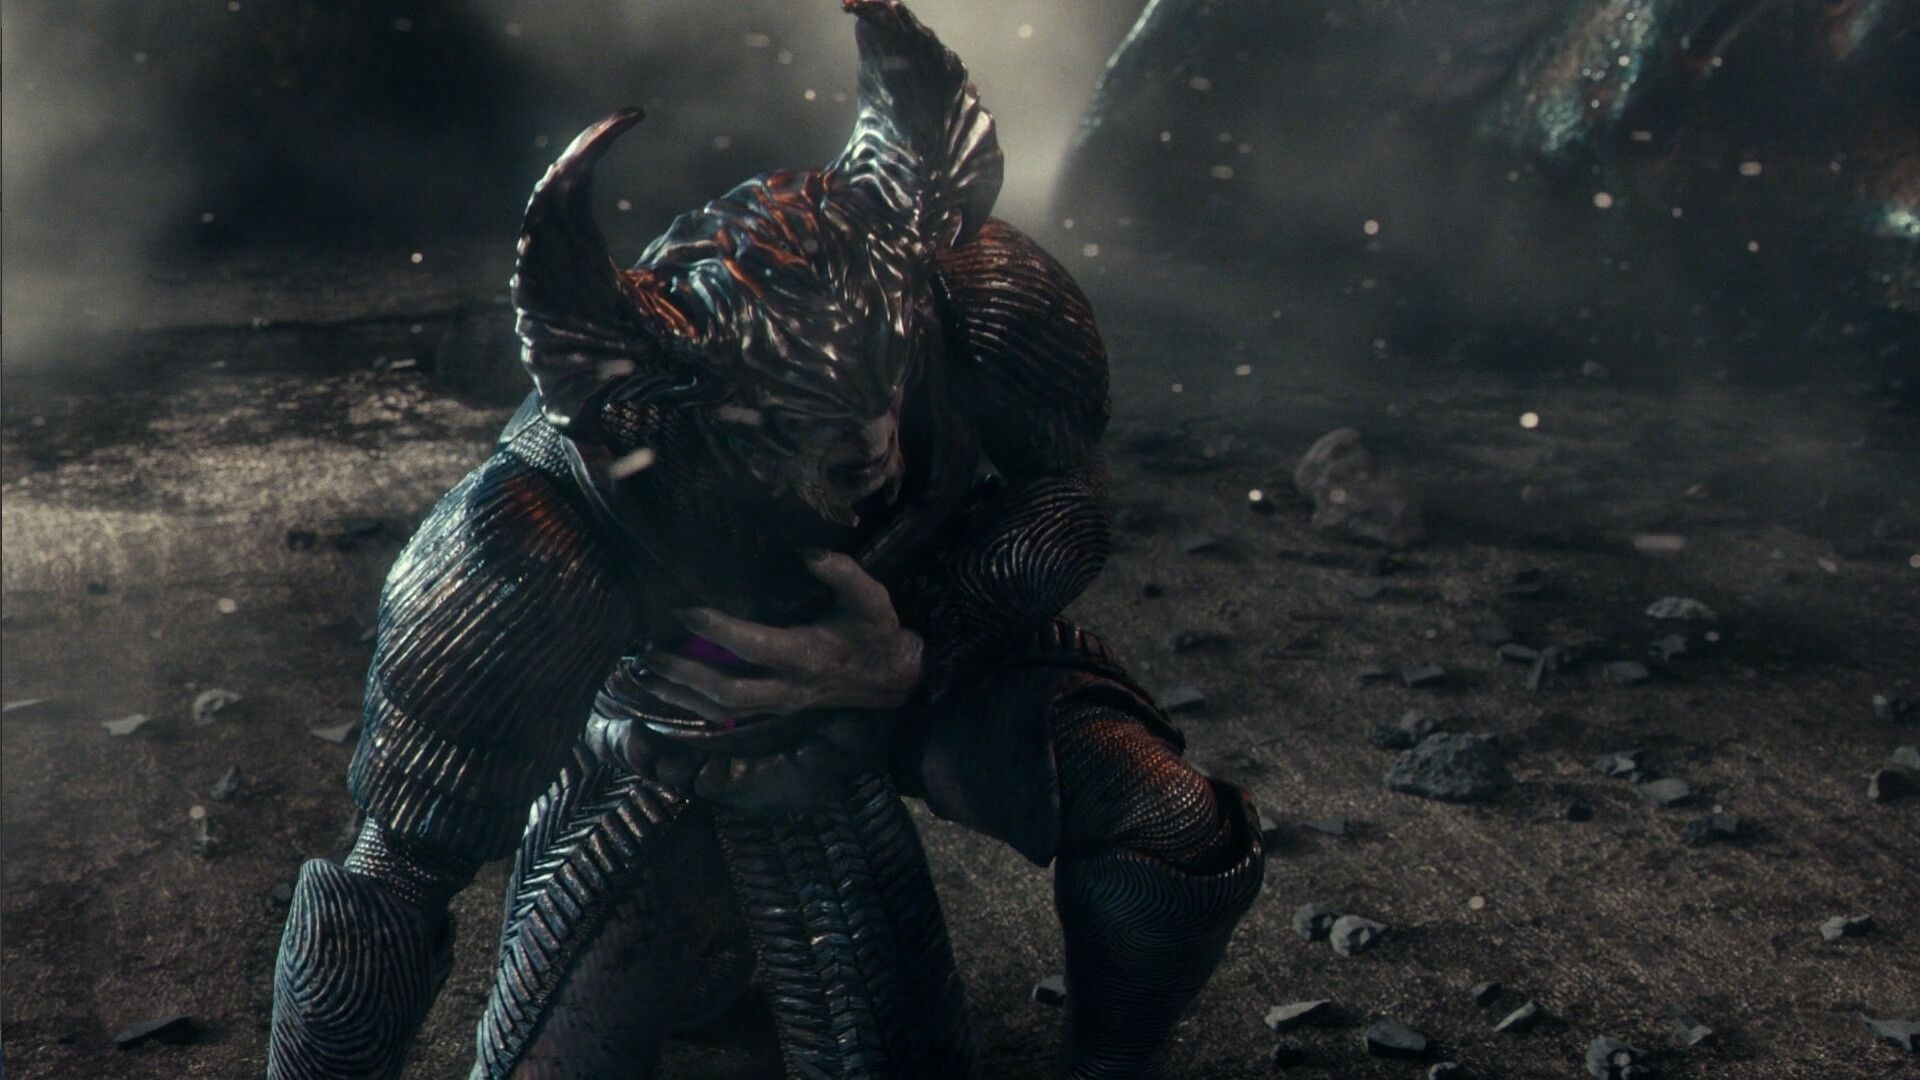 Justice League Steppenwolf wallpapers, Top free backgrounds, Epic battles, 1920x1080 Full HD Desktop